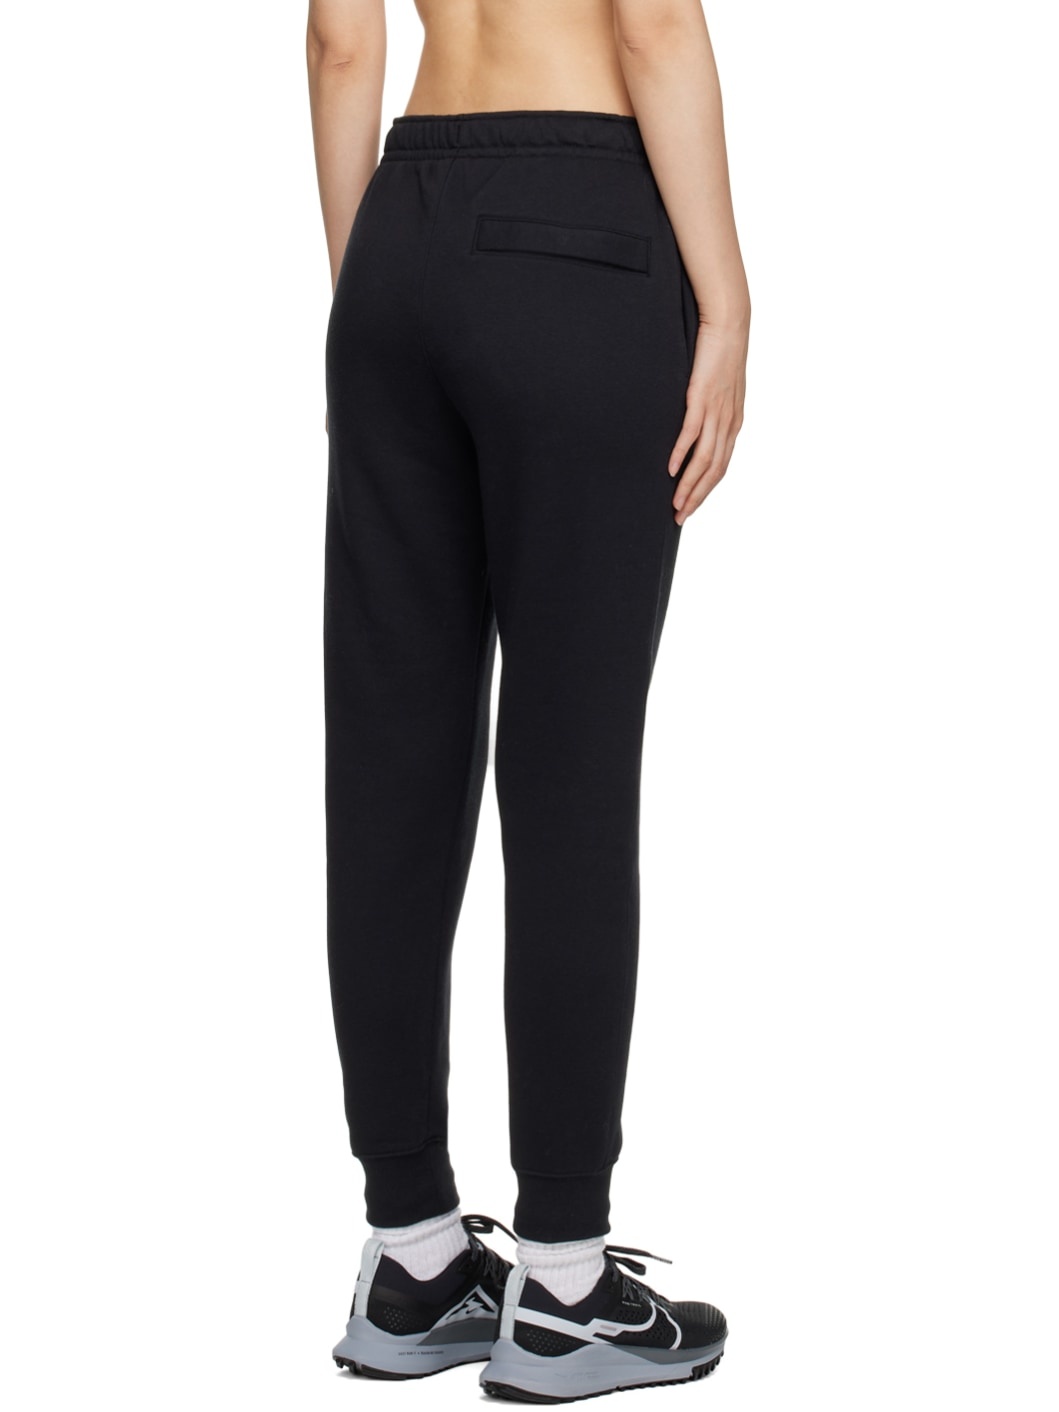 Black Embroidered Lounge Pants - 3